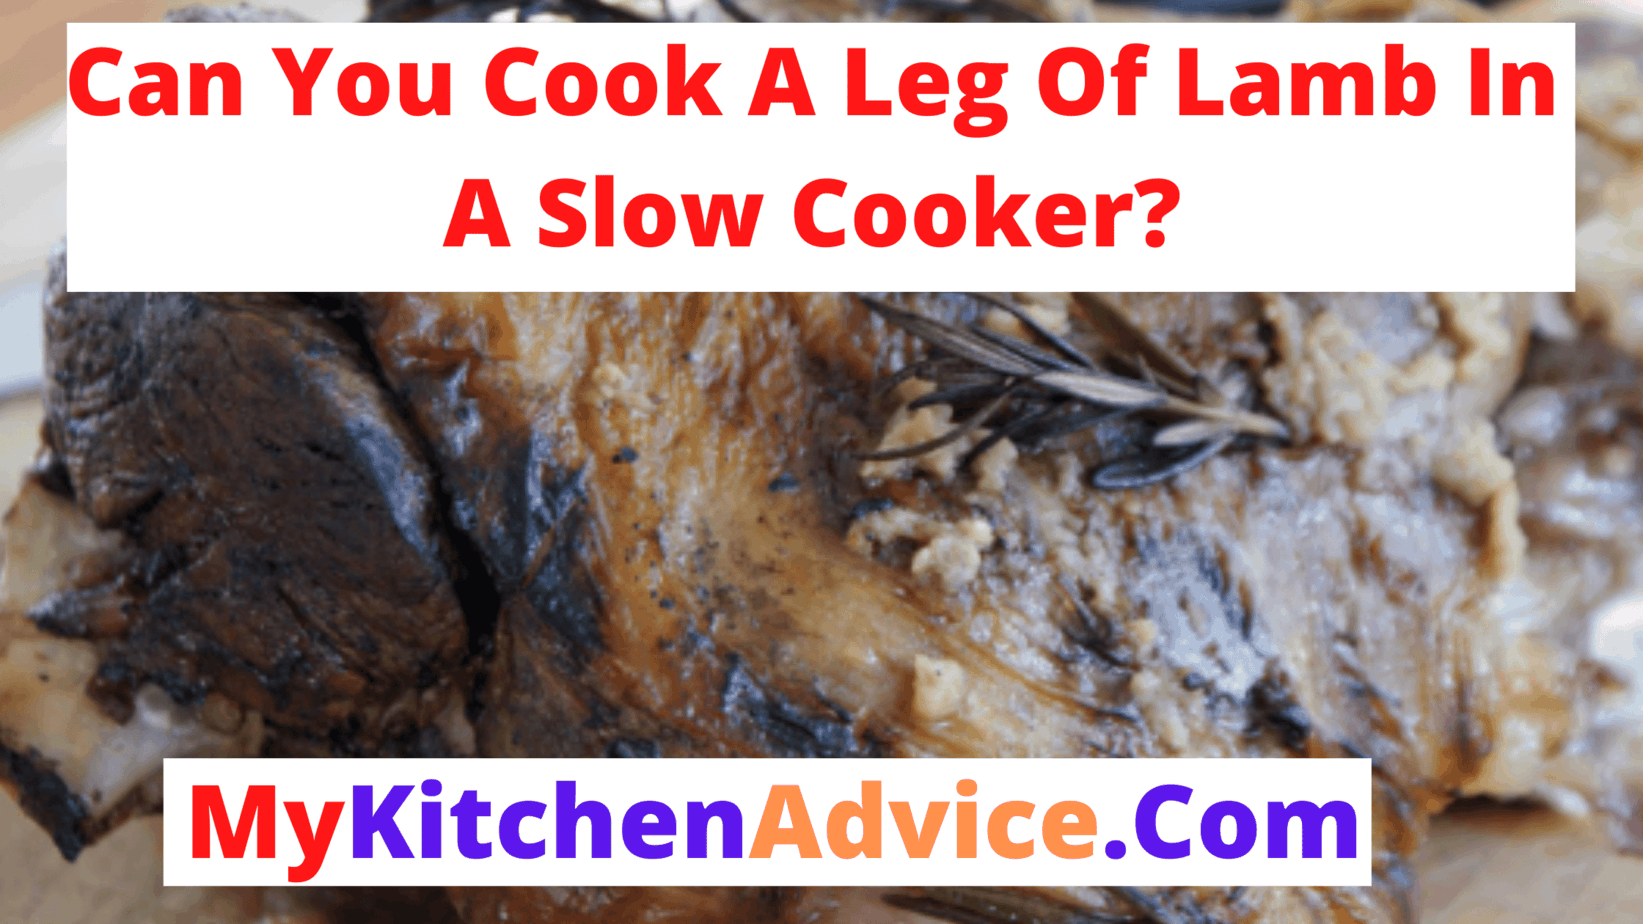 Can You Cook A Leg Of Lamb In A Slow Cooker